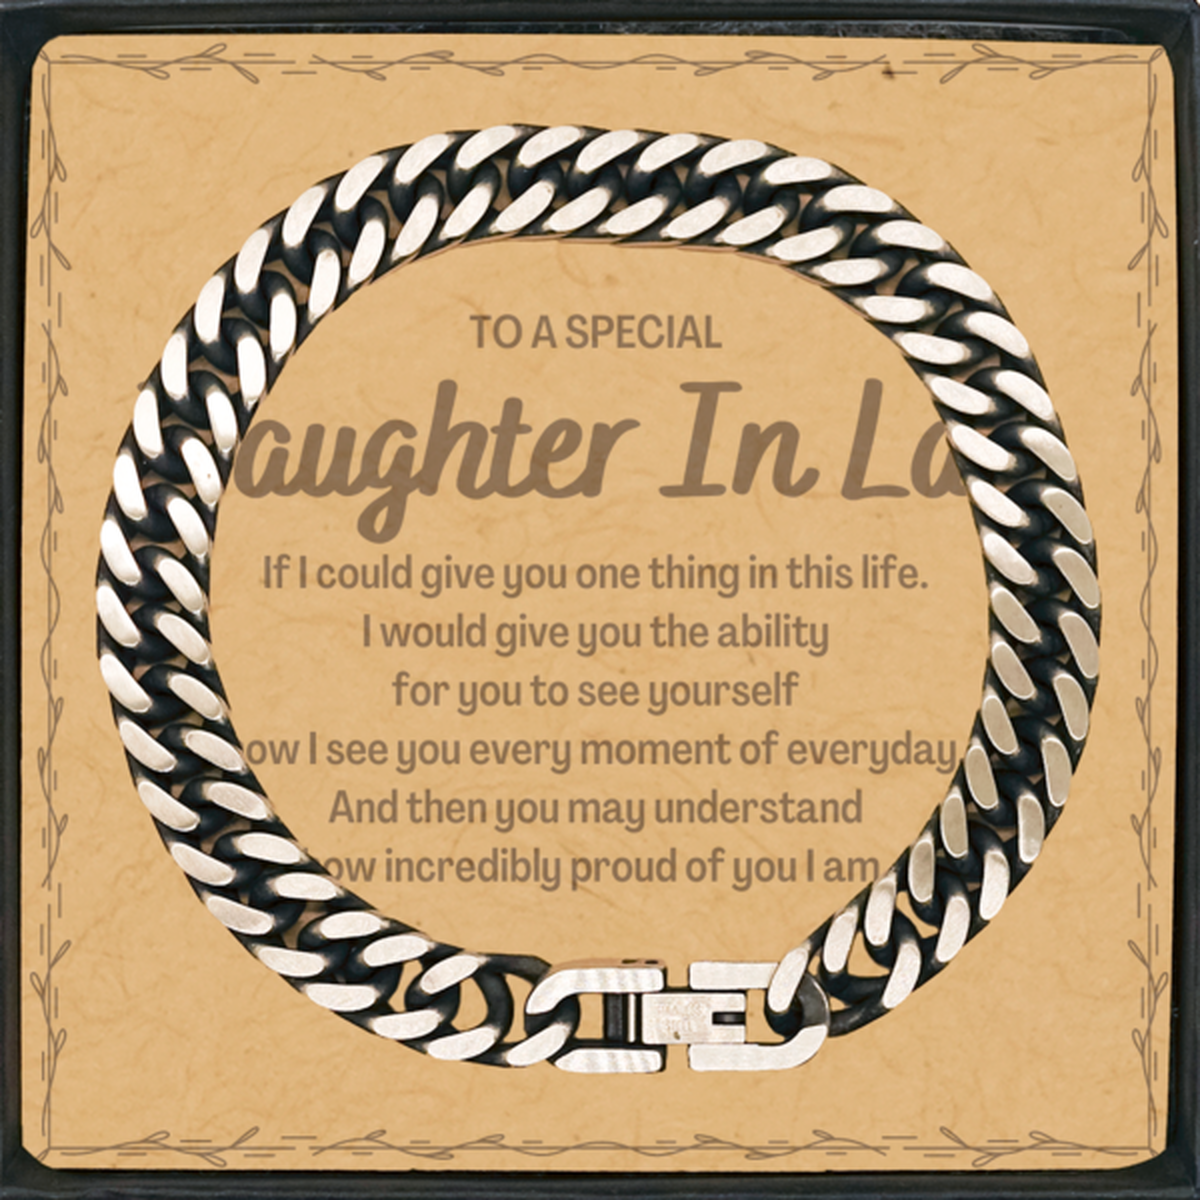 To My Daughter In Law Cuban Link Chain Bracelet, Gifts For Daughter In Law Message Card, Inspirational Gifts for Christmas Birthday, Epic Gifts for Daughter In Law To A Special Daughter In Law how incredibly proud of you I am